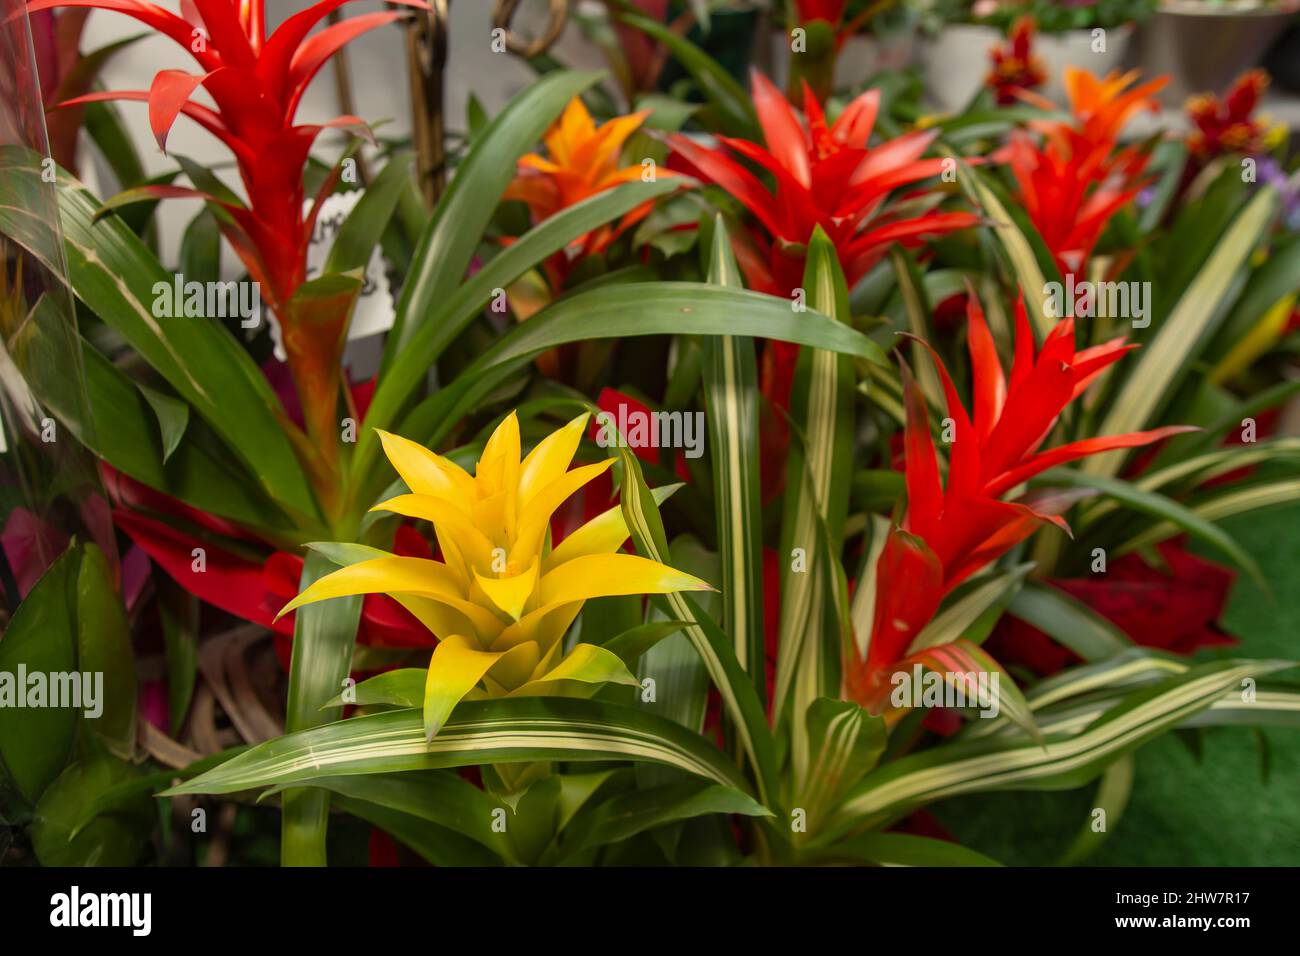 Guzmania red and yellow flowers, in a flower shop Stock Photo